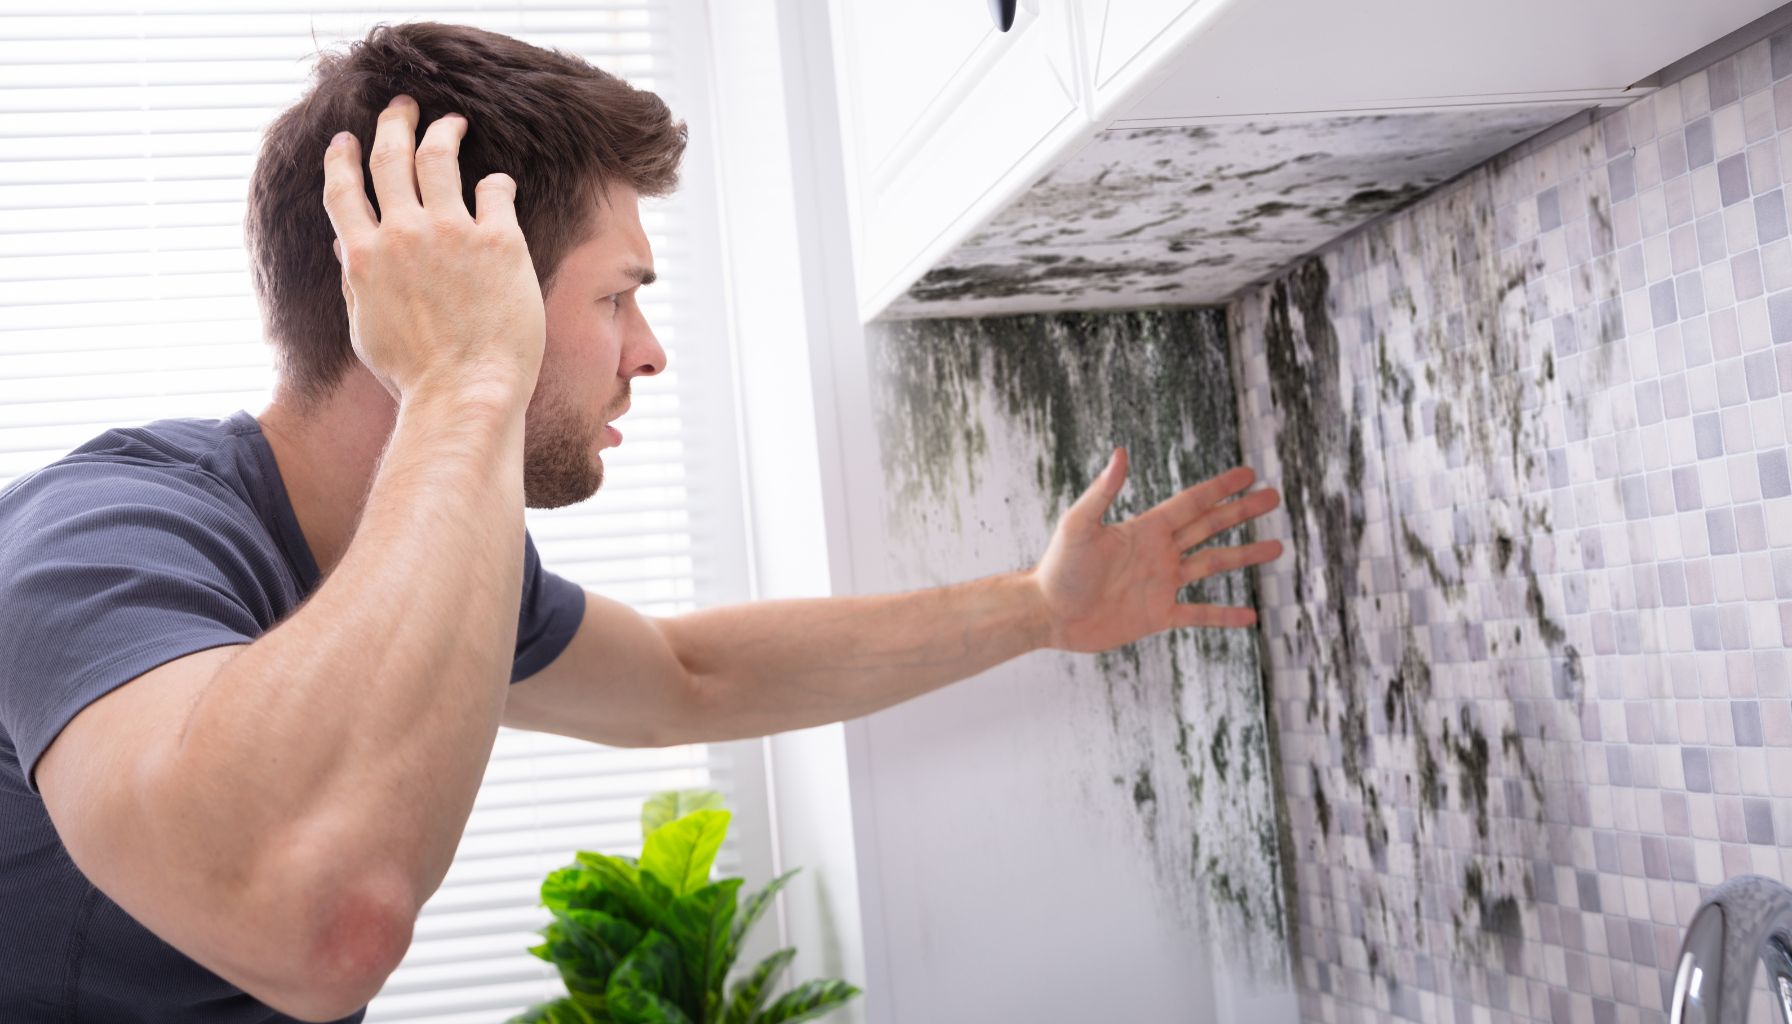 A man looks at a large patch of mold on a kitchen wall, touching his head in apparent frustration or concern. The overwhelming need for water damage restoration is evident, making the situation even more disheartening. -PureOneServices